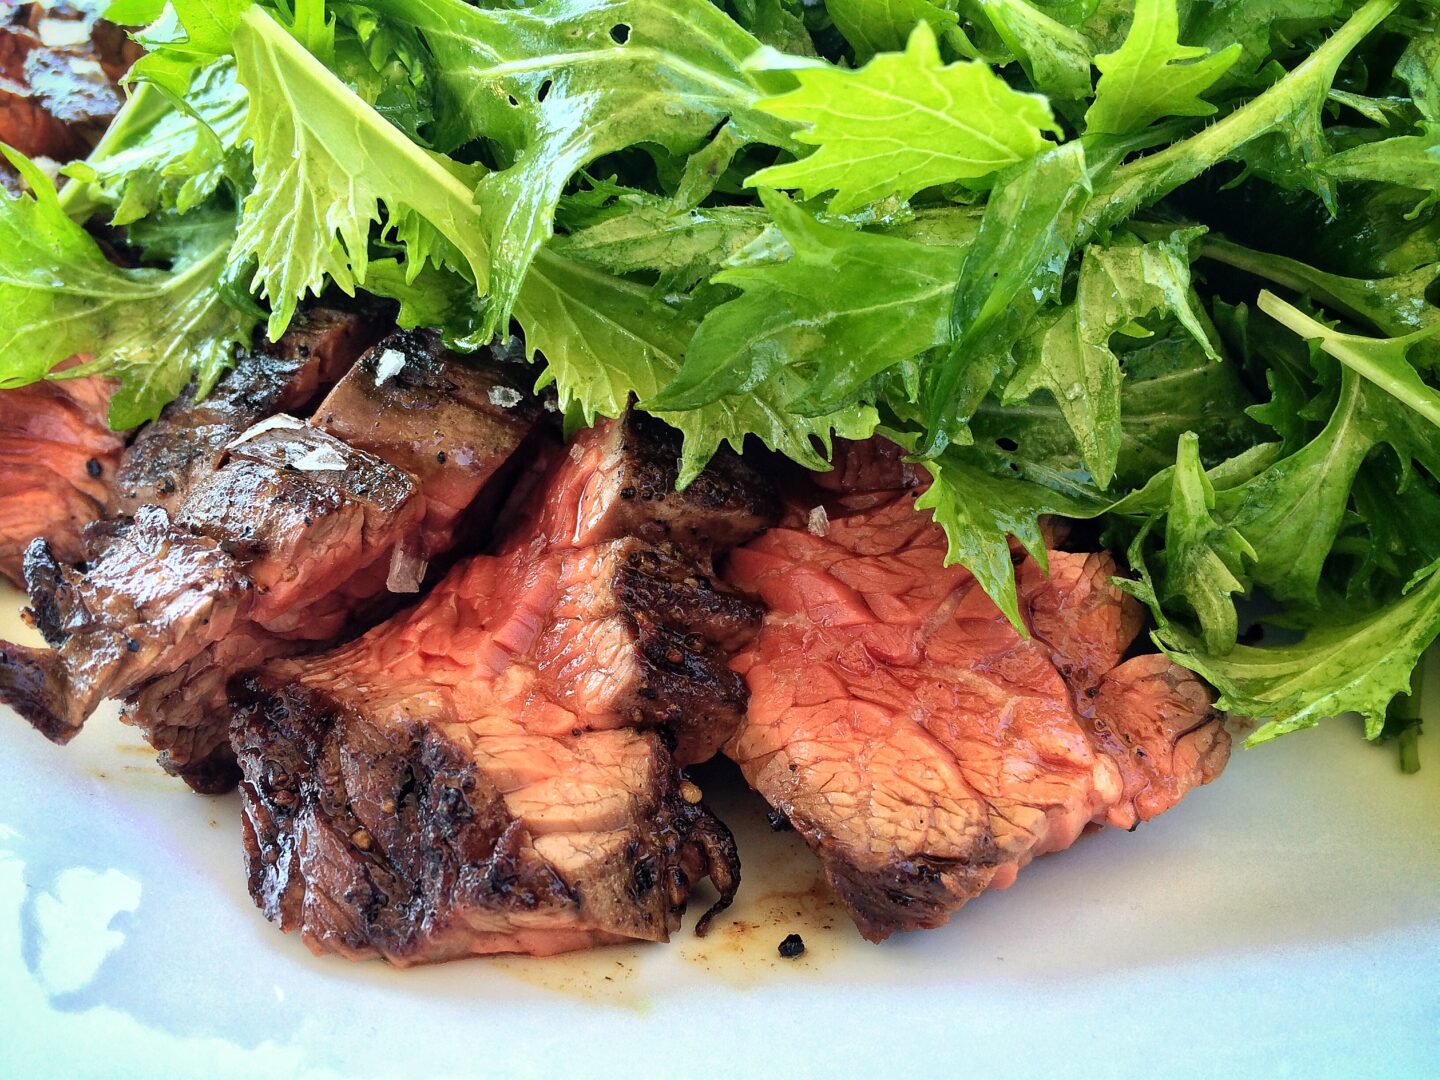 A steak on a plate with greens on it.